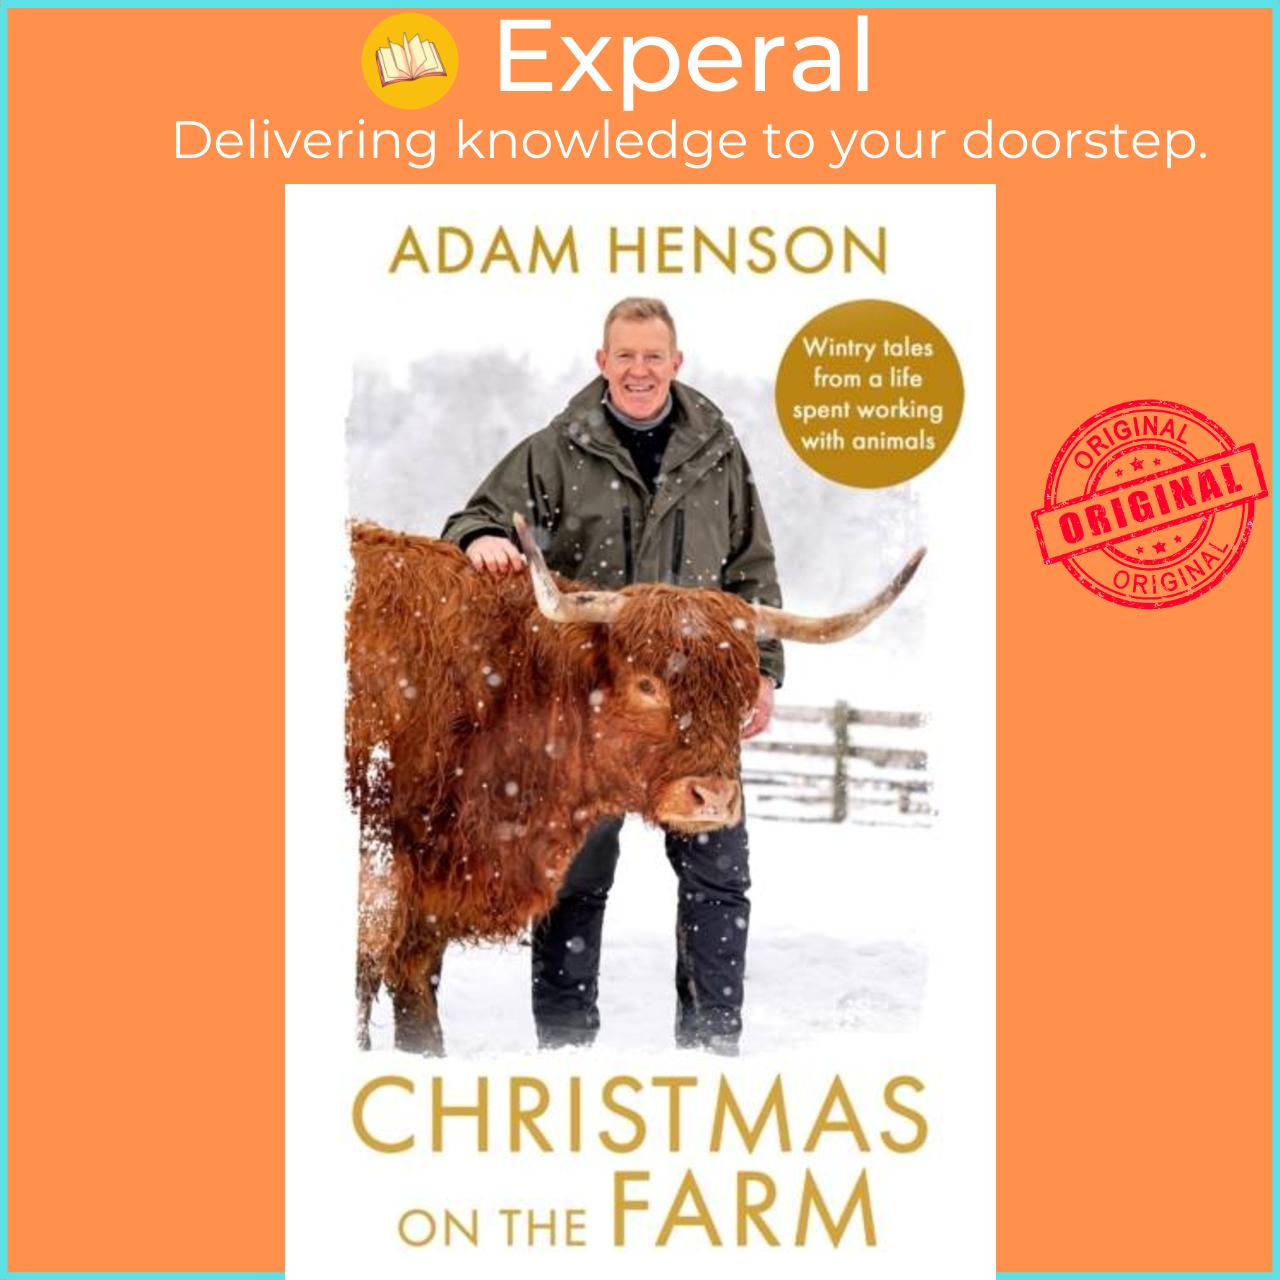 Sách - Christmas on the Farm - Wintry tales from a life spent working with animal by Adam Henson (UK edition, hardcover)